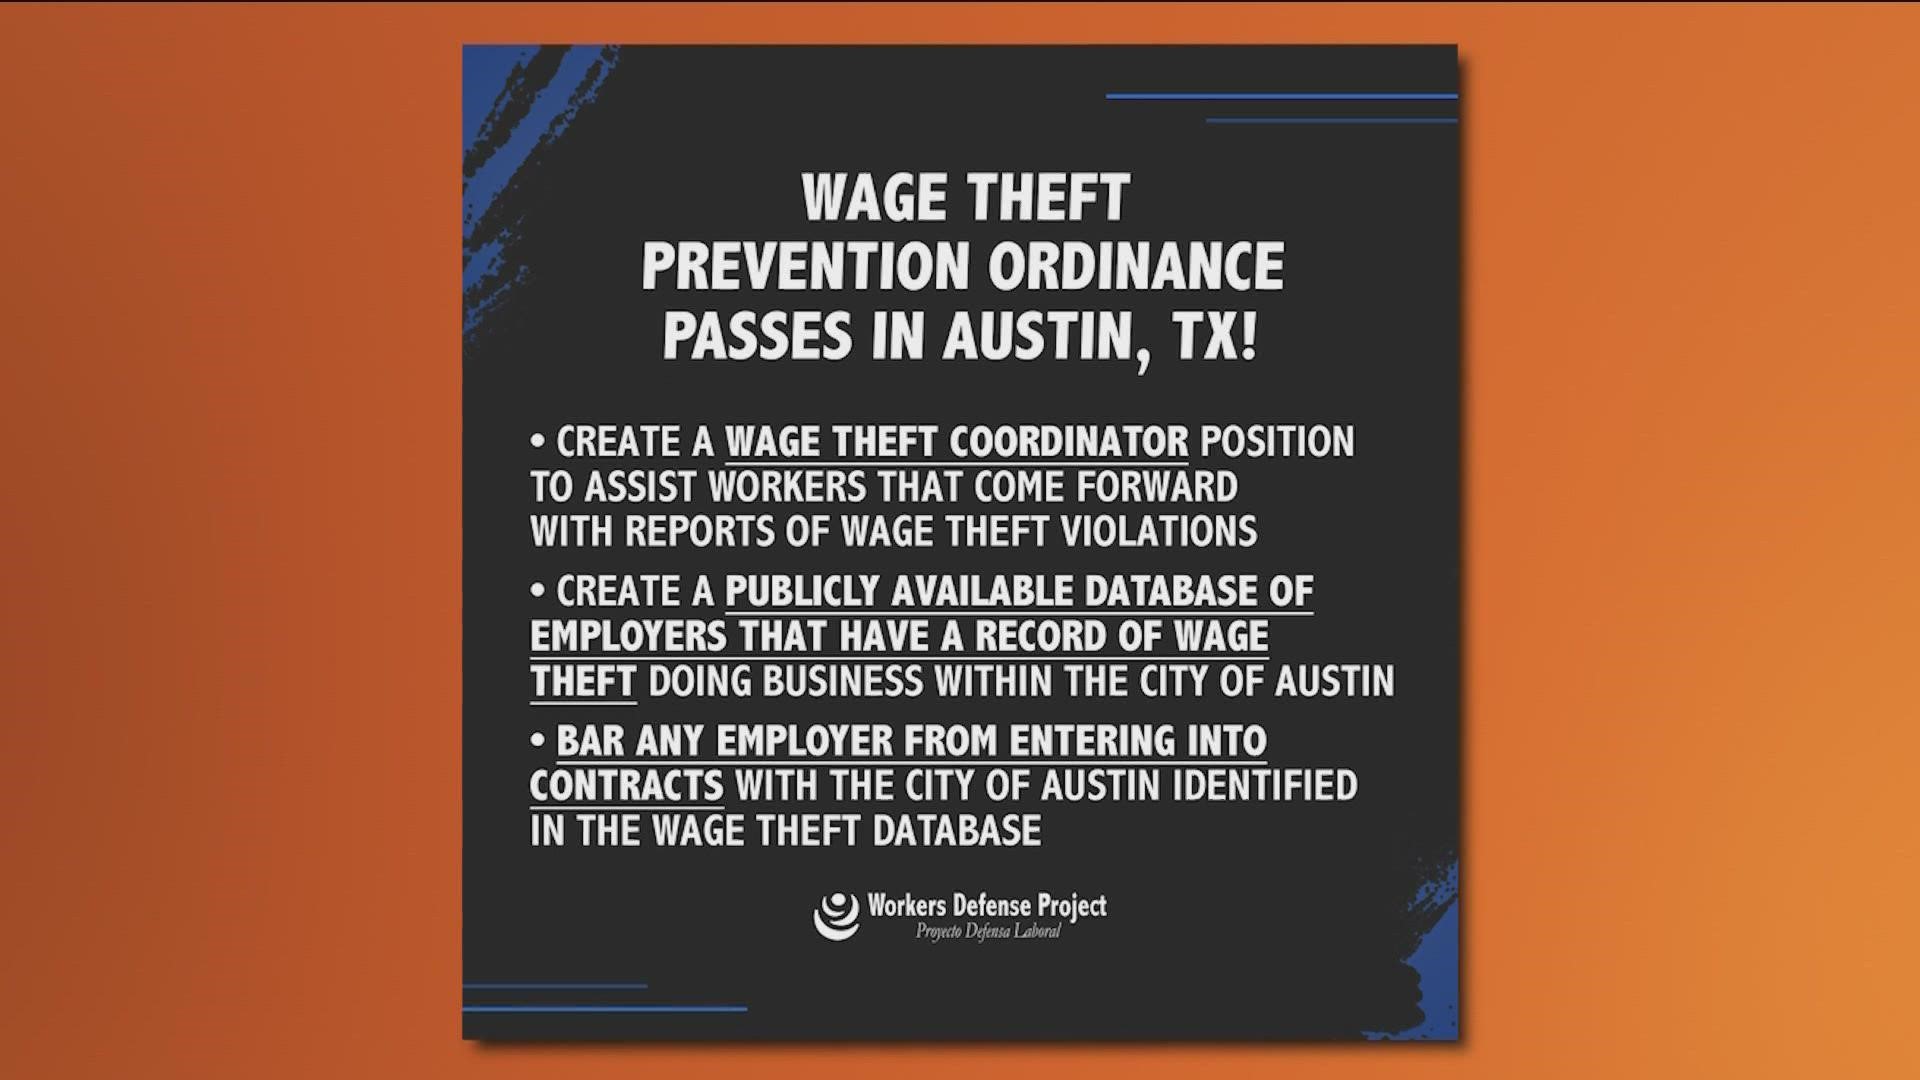 On Thursday, the Austin City Council voted on a way to protect laborers.